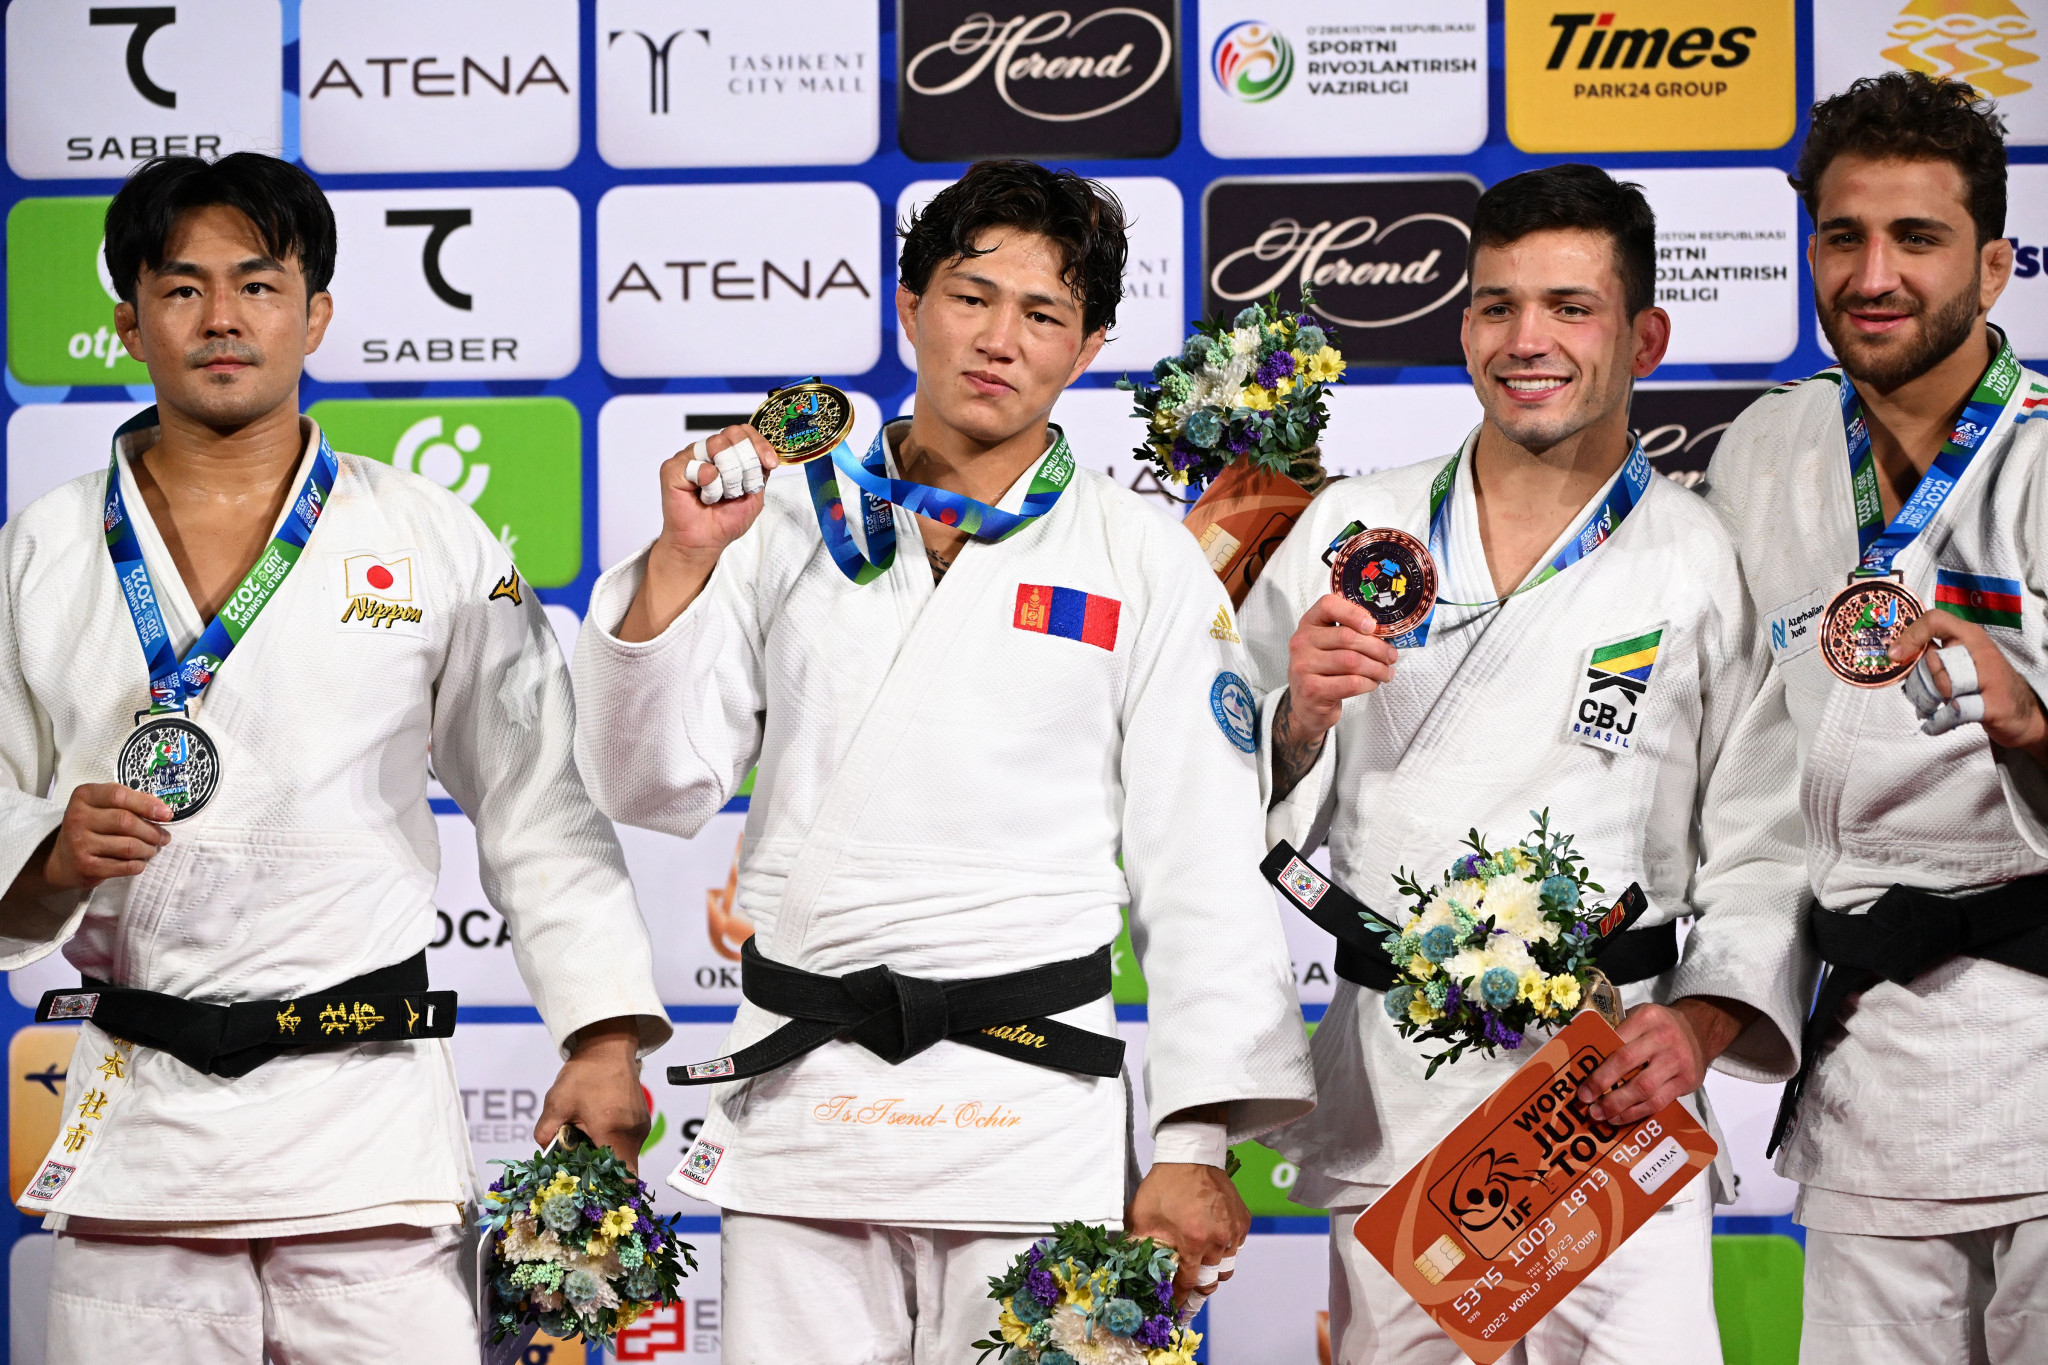 Brazil's Daniel Cargnin, third right, and Azerbaijan's Hidayat Heydarov, right, clinched bronze medals in the men's tournaments at the Humo Arena ©Getty Images